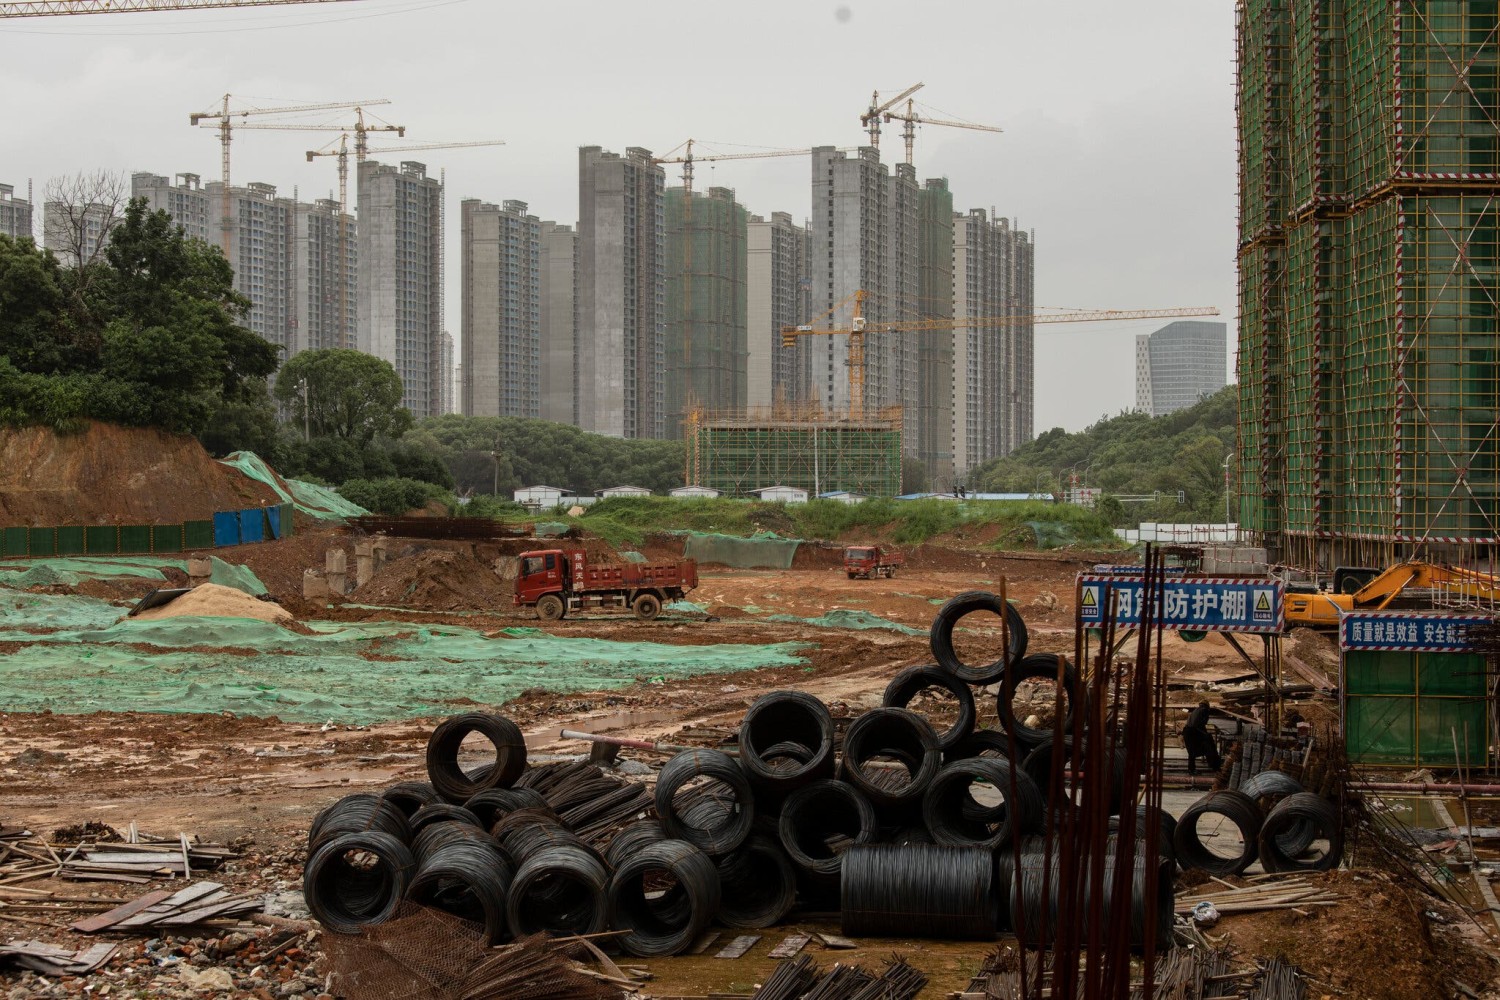 A construction site of a residential property development in Nanchang, China, in May.Credit...Qilai Shen for The New York Times